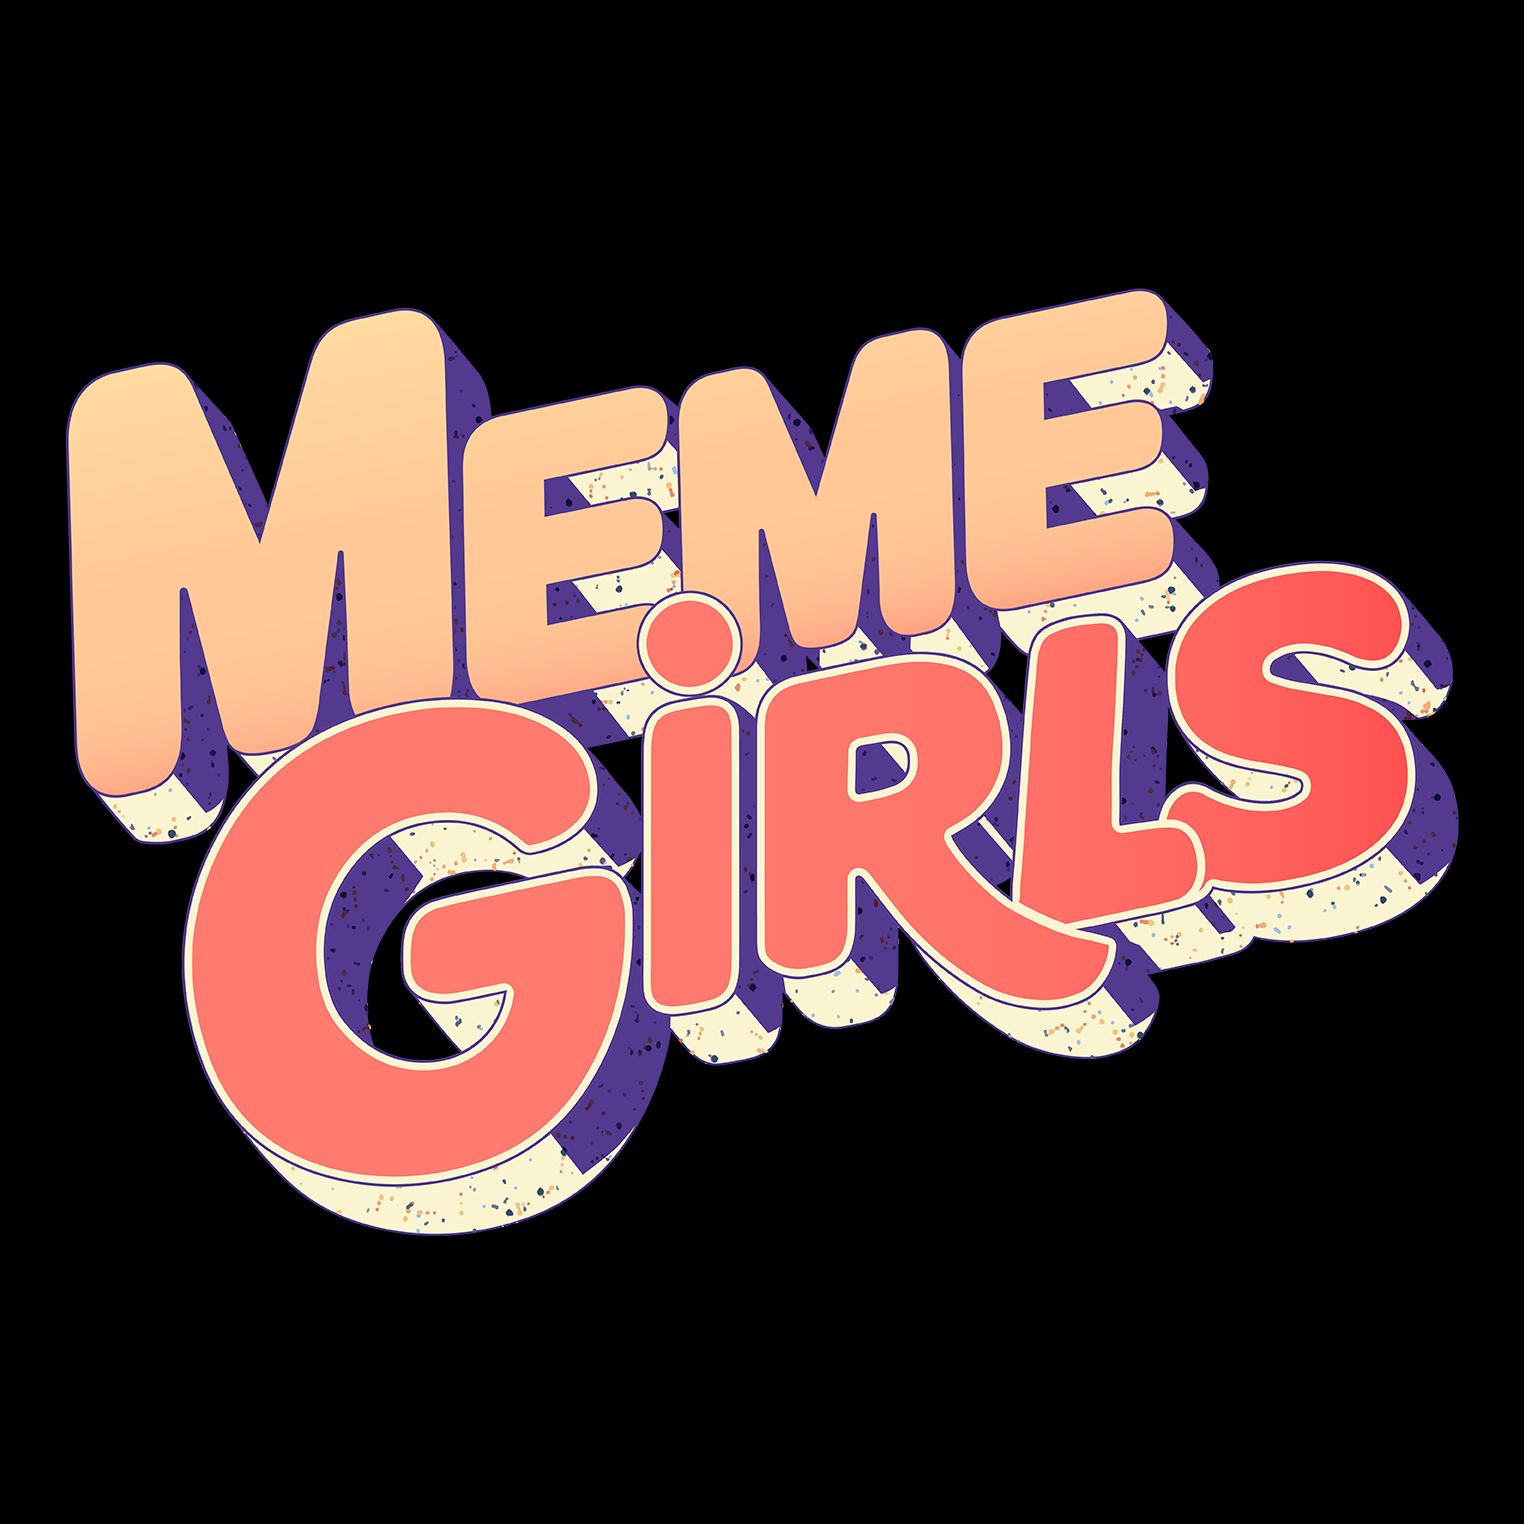 memes about girls